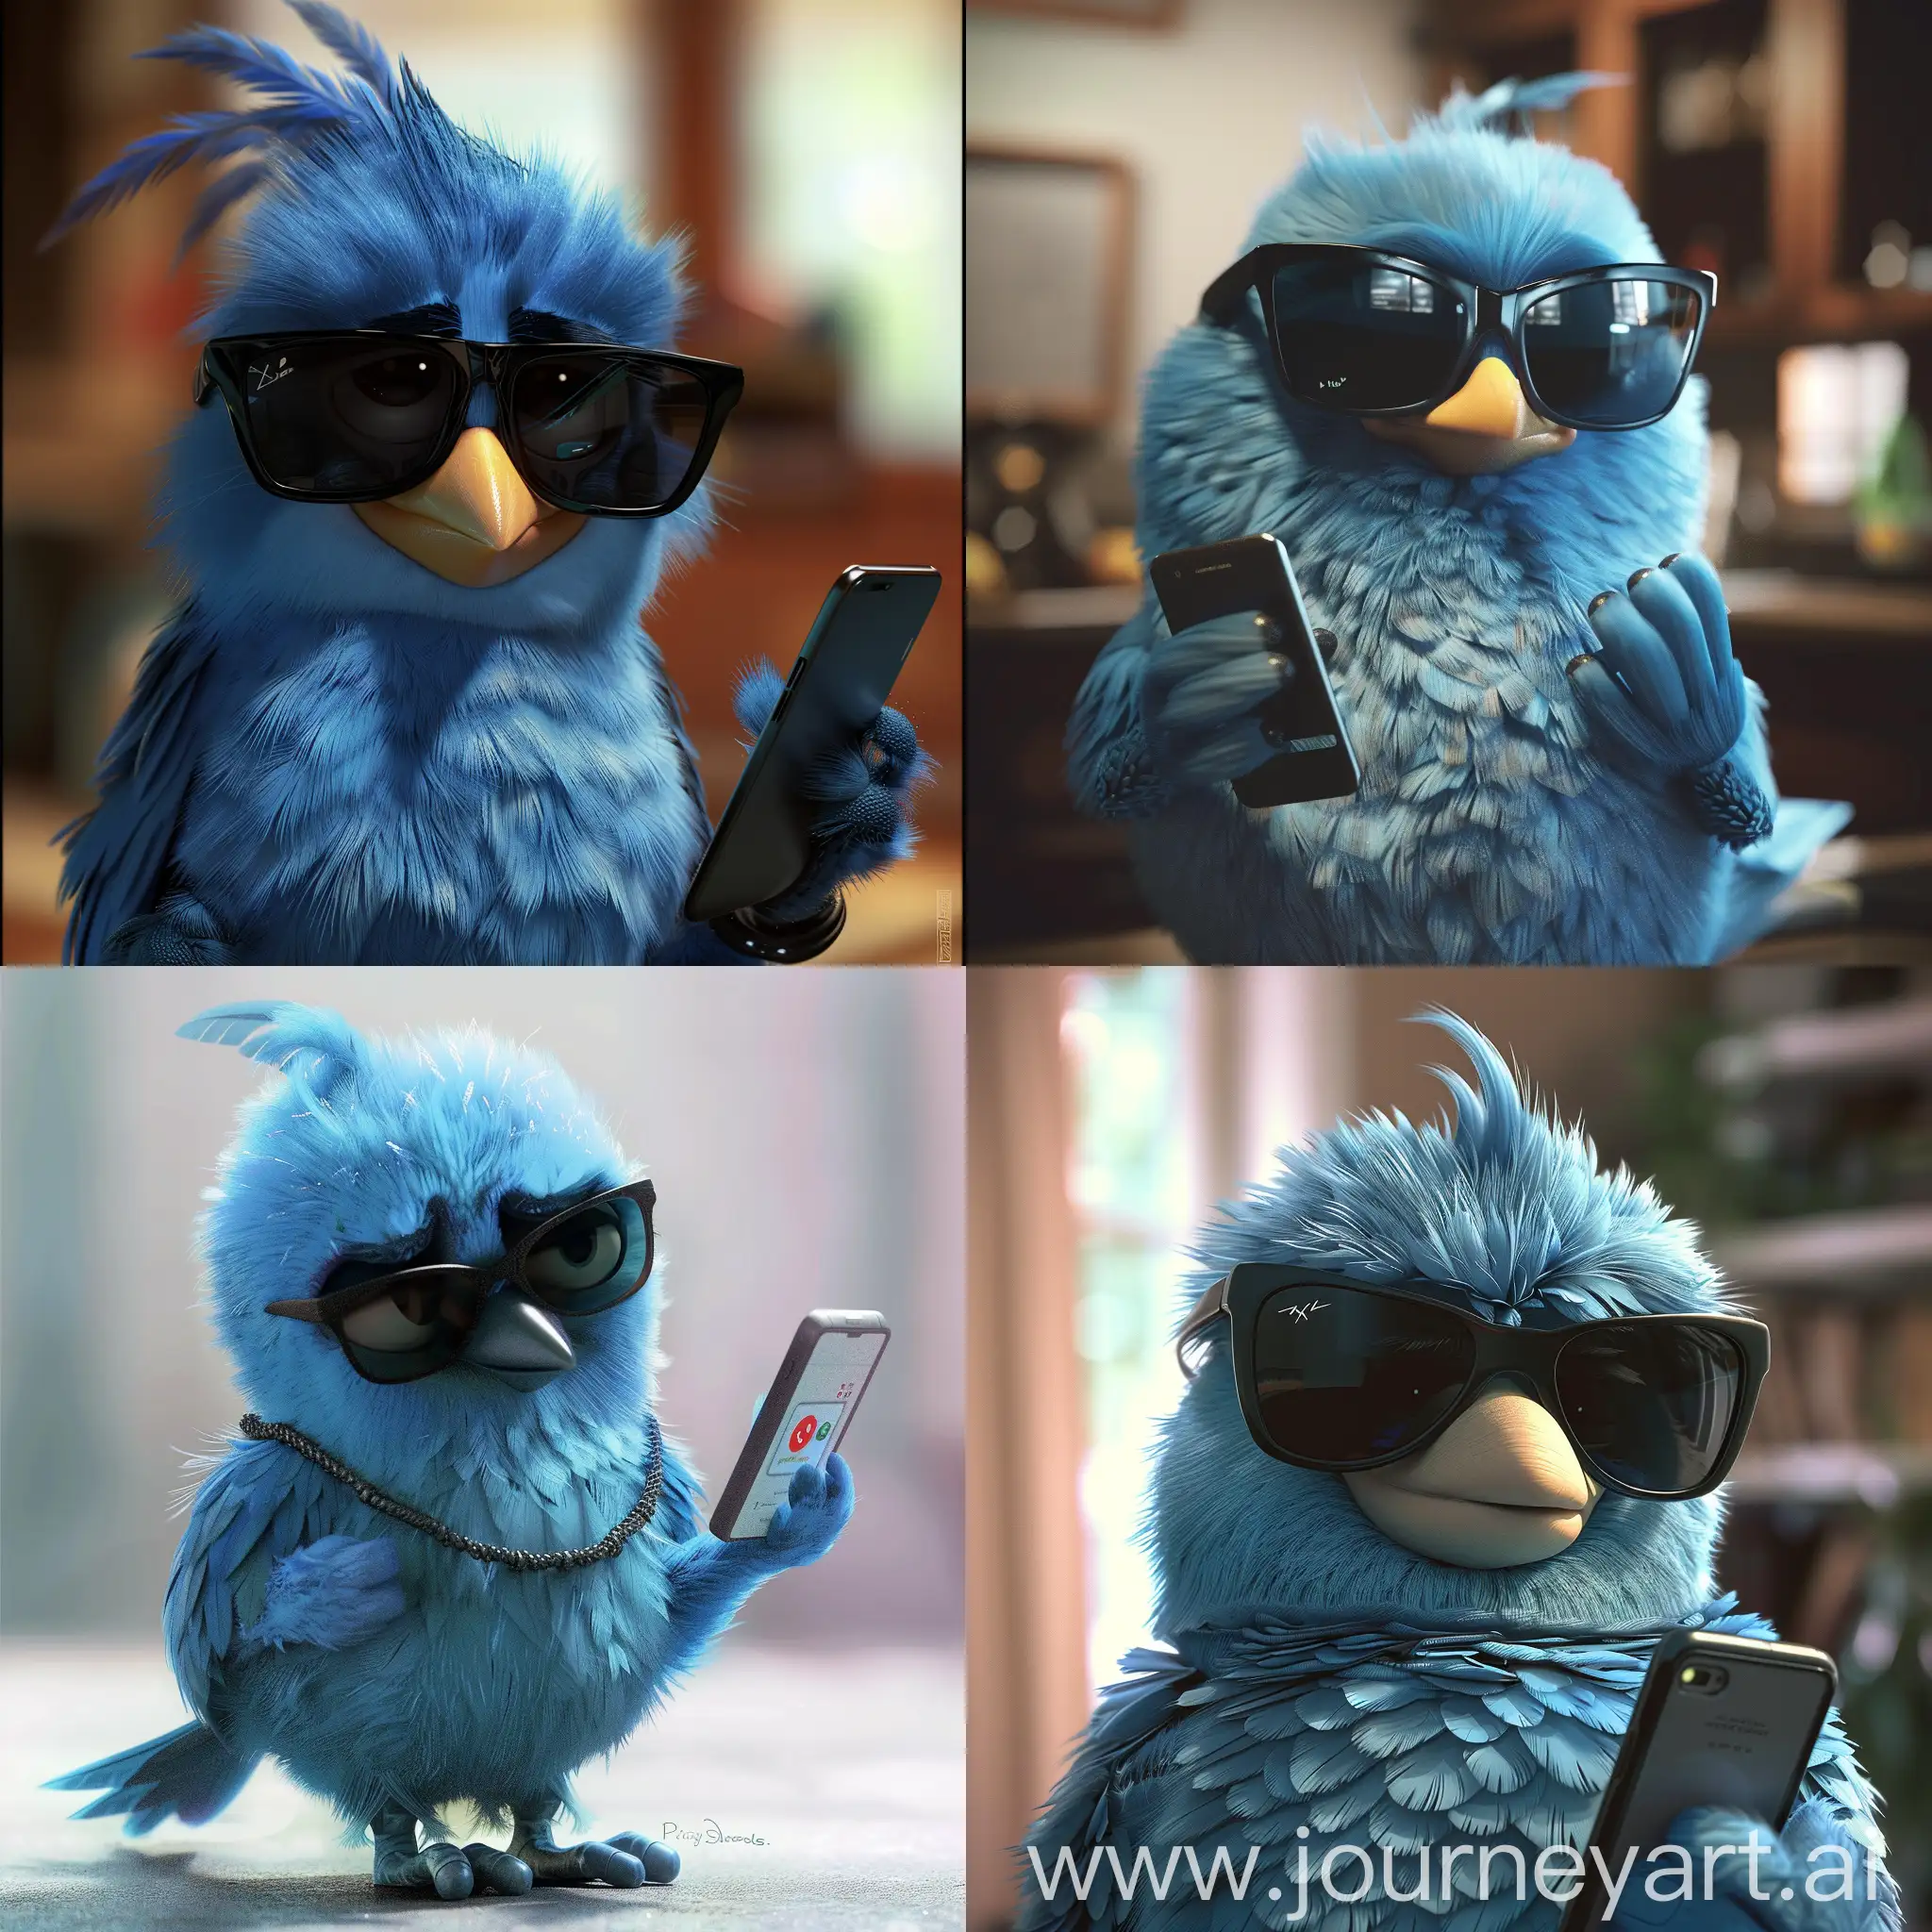 Cool-Blue-Bird-Showing-Phone-with-Kind-Look-and-Sunglasses